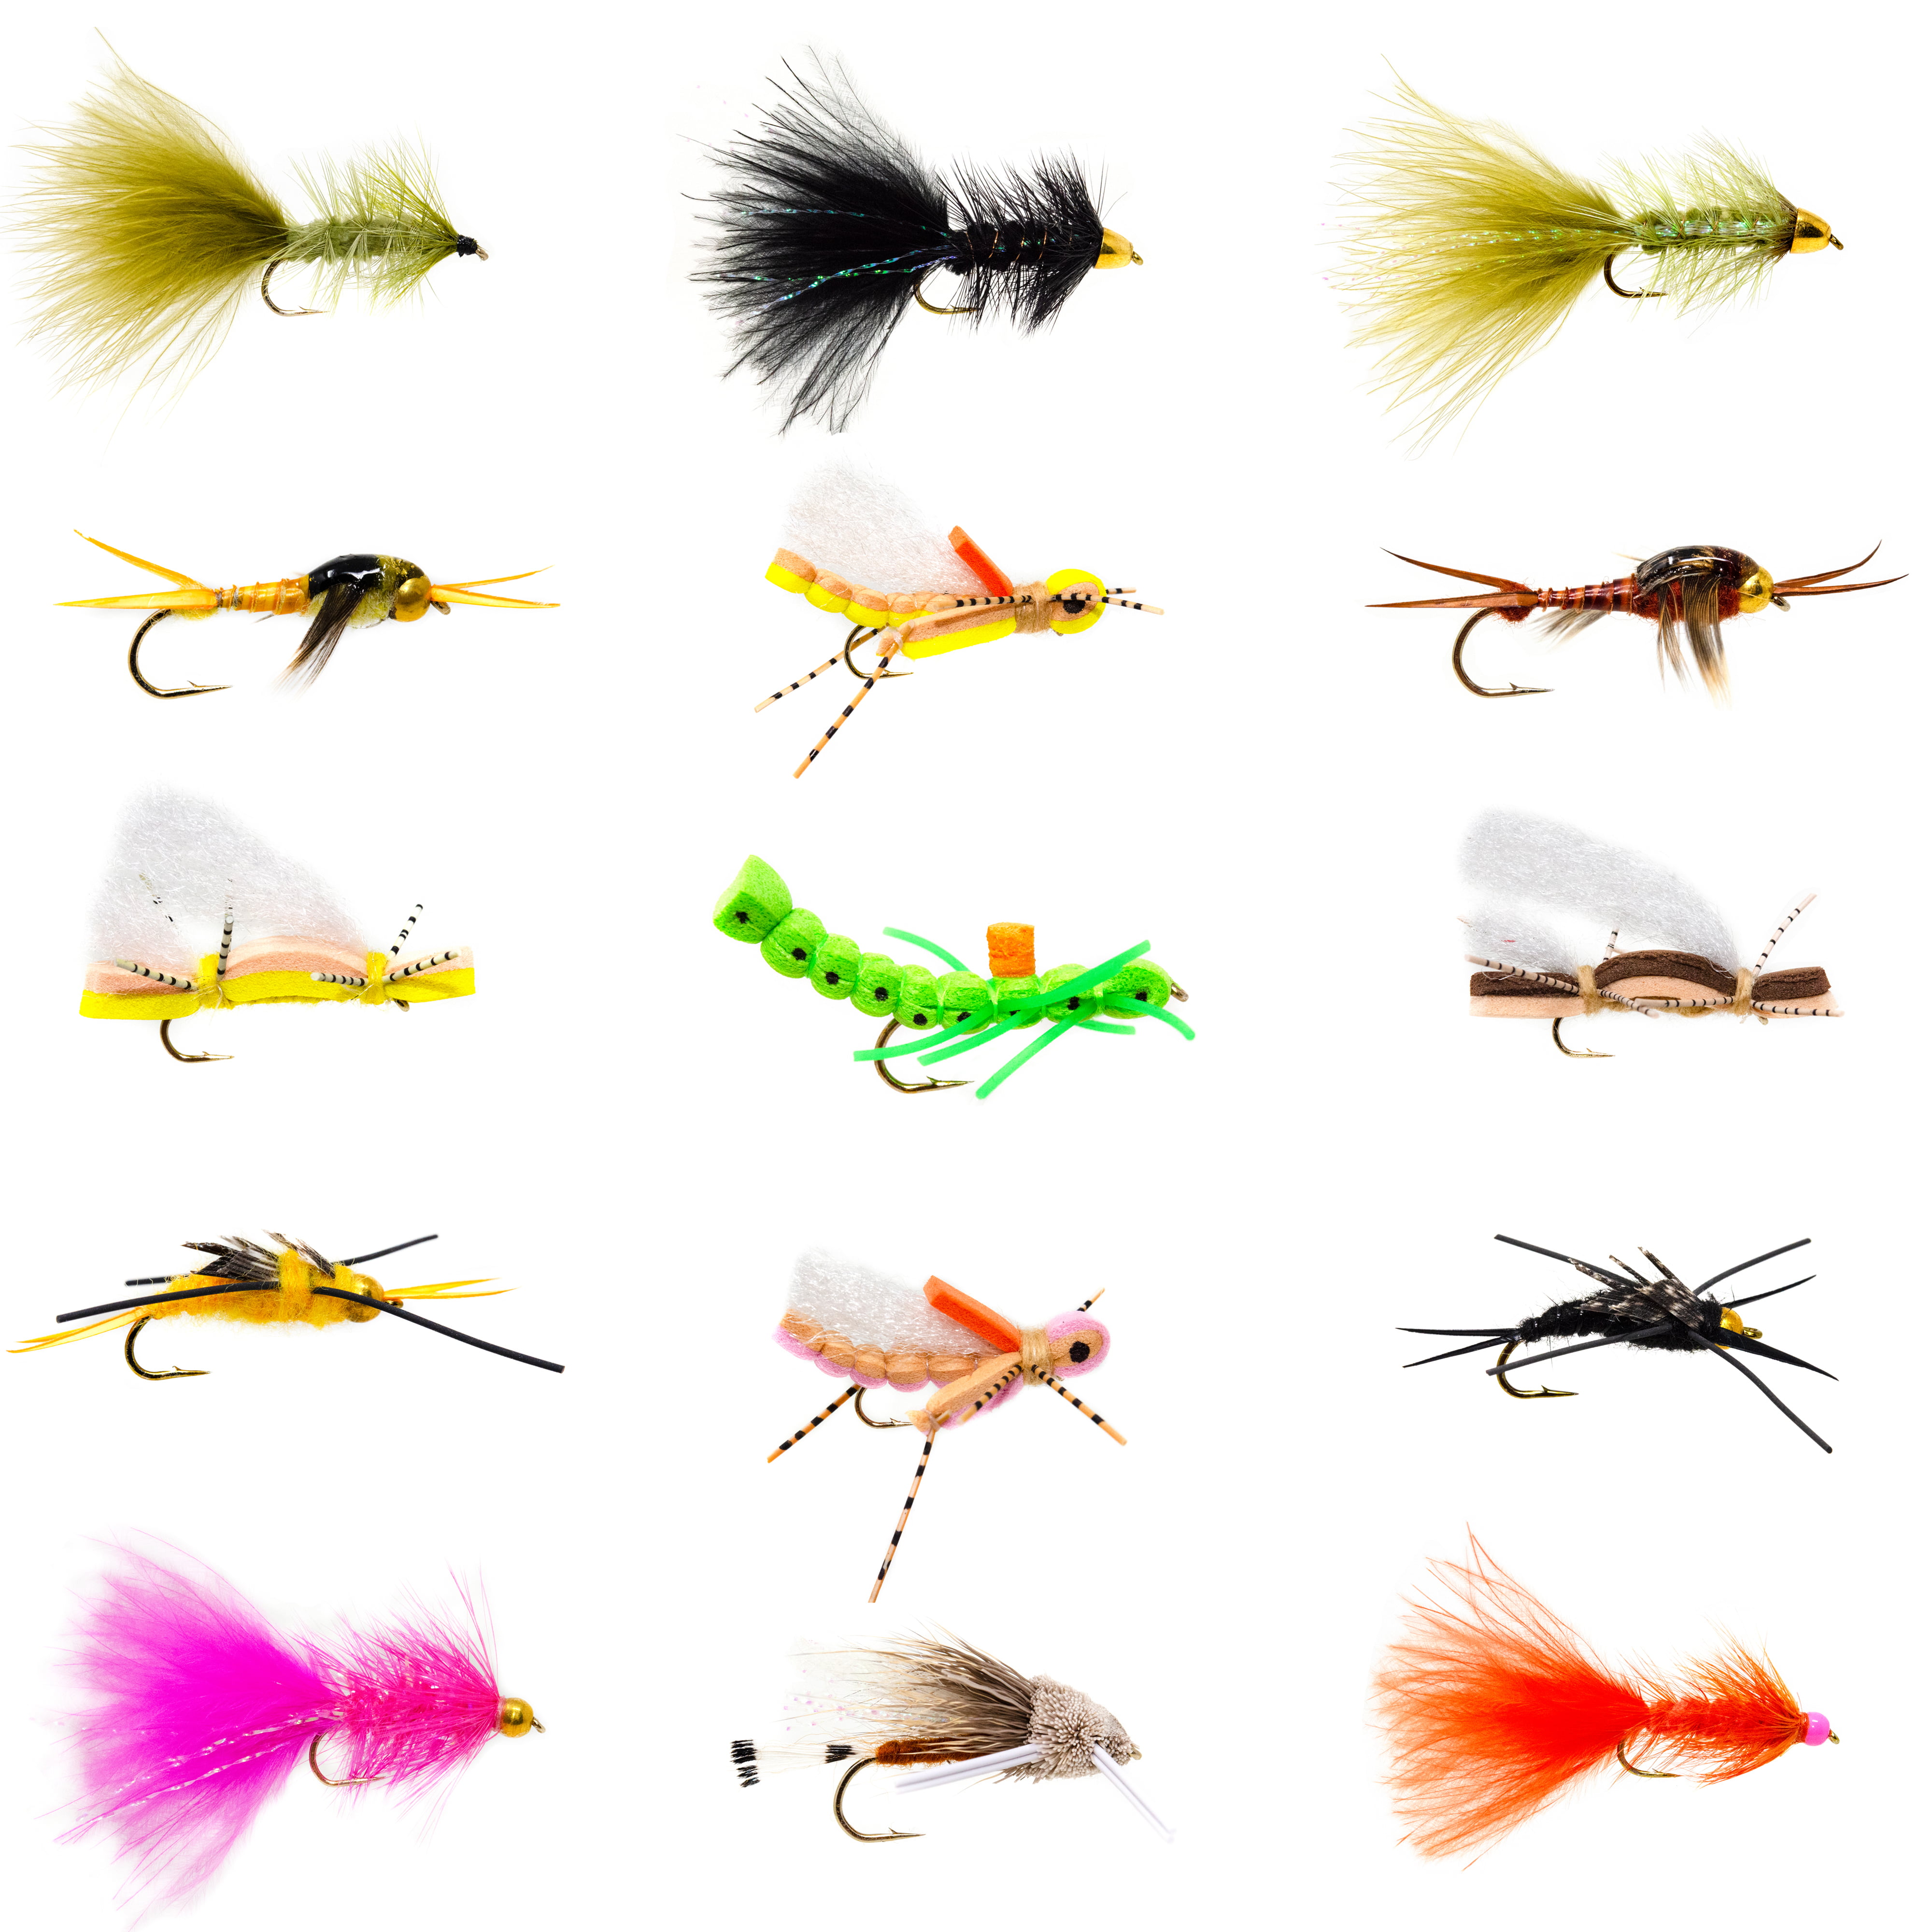  Ansnbo 36PCS Fly Fishing Flies Kit, Hand Tied Trout Bass Fly  Assortment with Fly Box, Dry Wet Nymph Flies Streamers Fly Fishing Gear  Gift : Sports & Outdoors